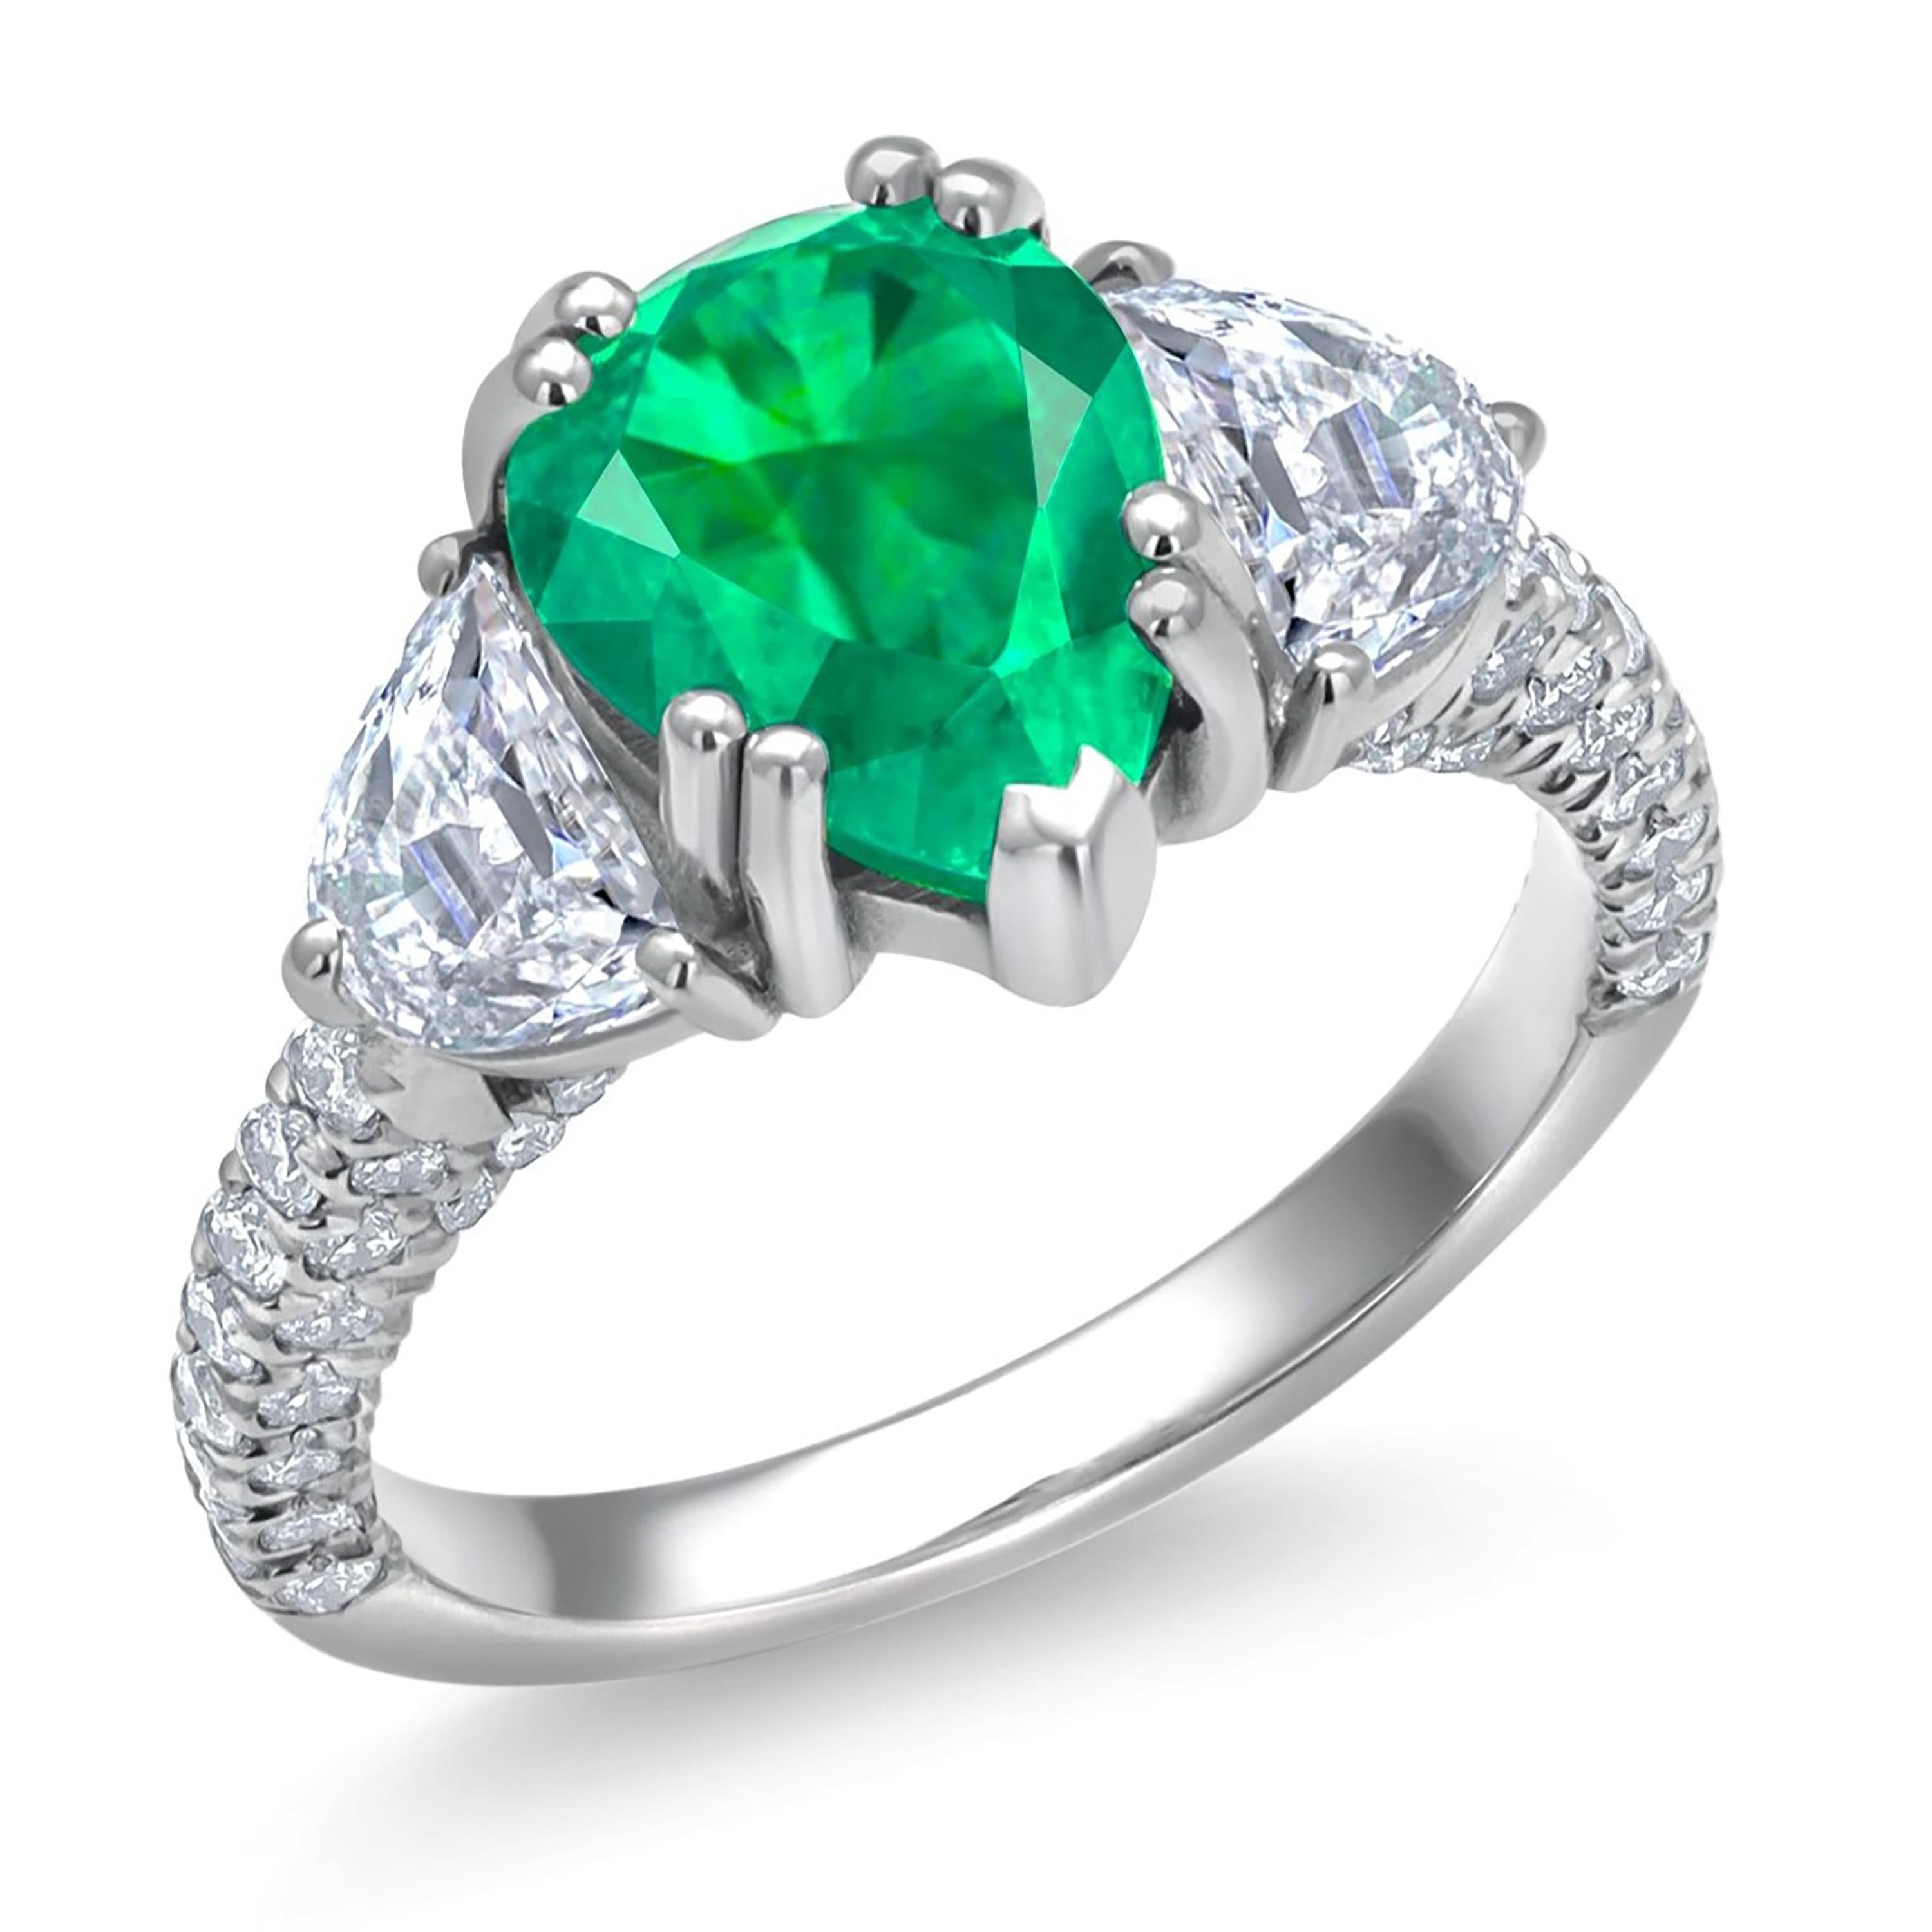 GIA Certified Colombian Pear Emerald Diamond 3.35 Carat 18 Karat Gold Ring For Sale 4